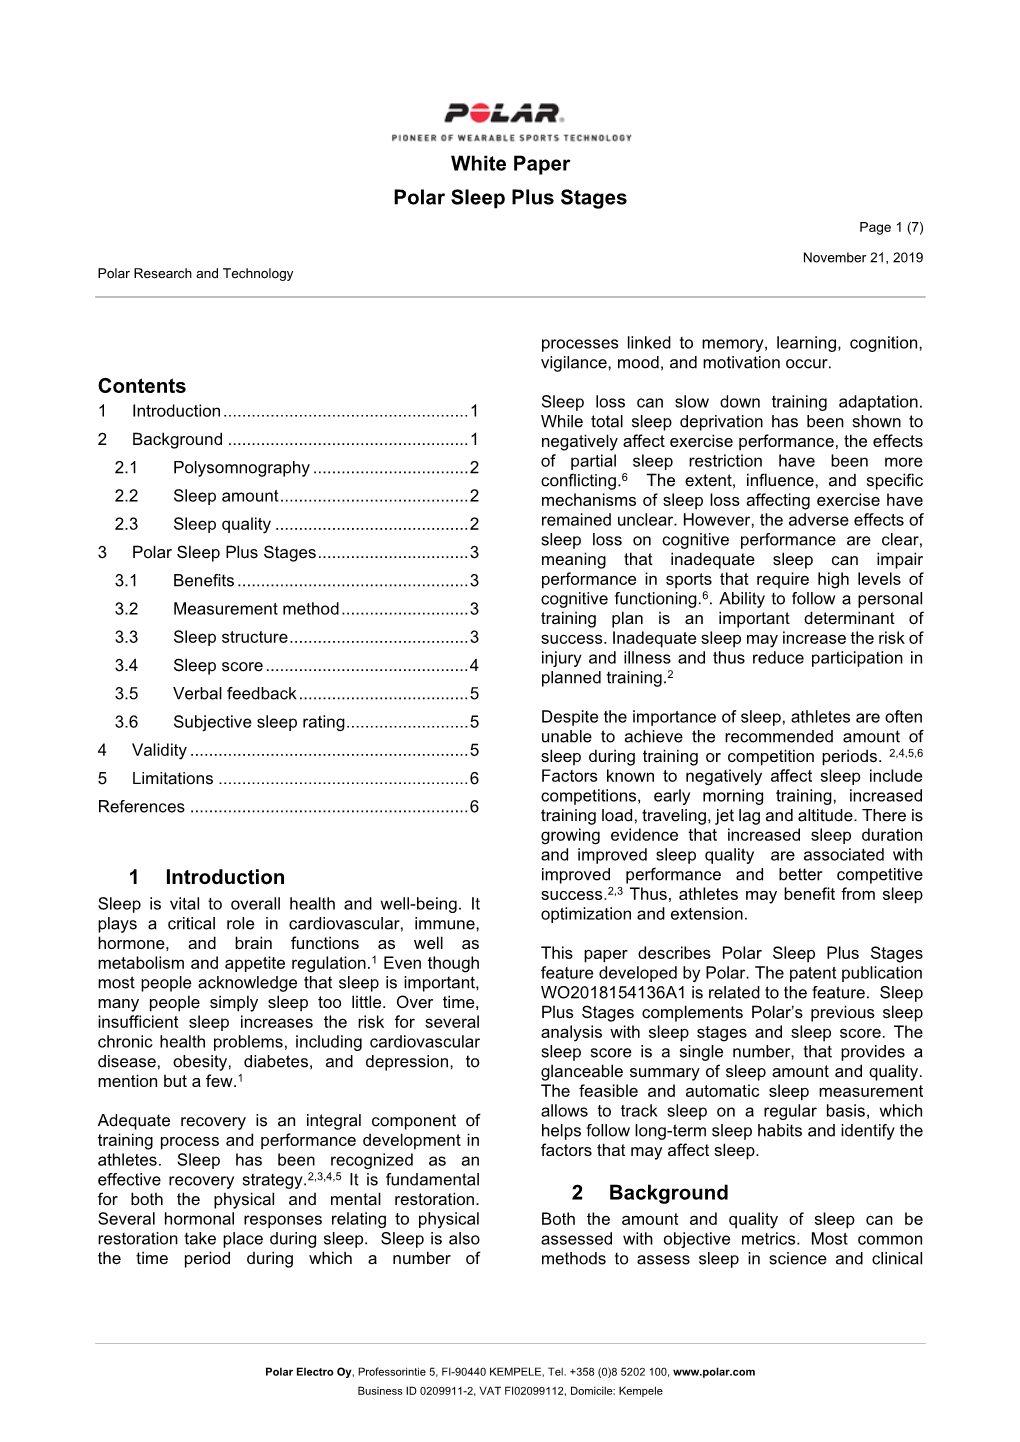 White Paper Polar Sleep Plus Stages Contents 1 Introduction 2 Background